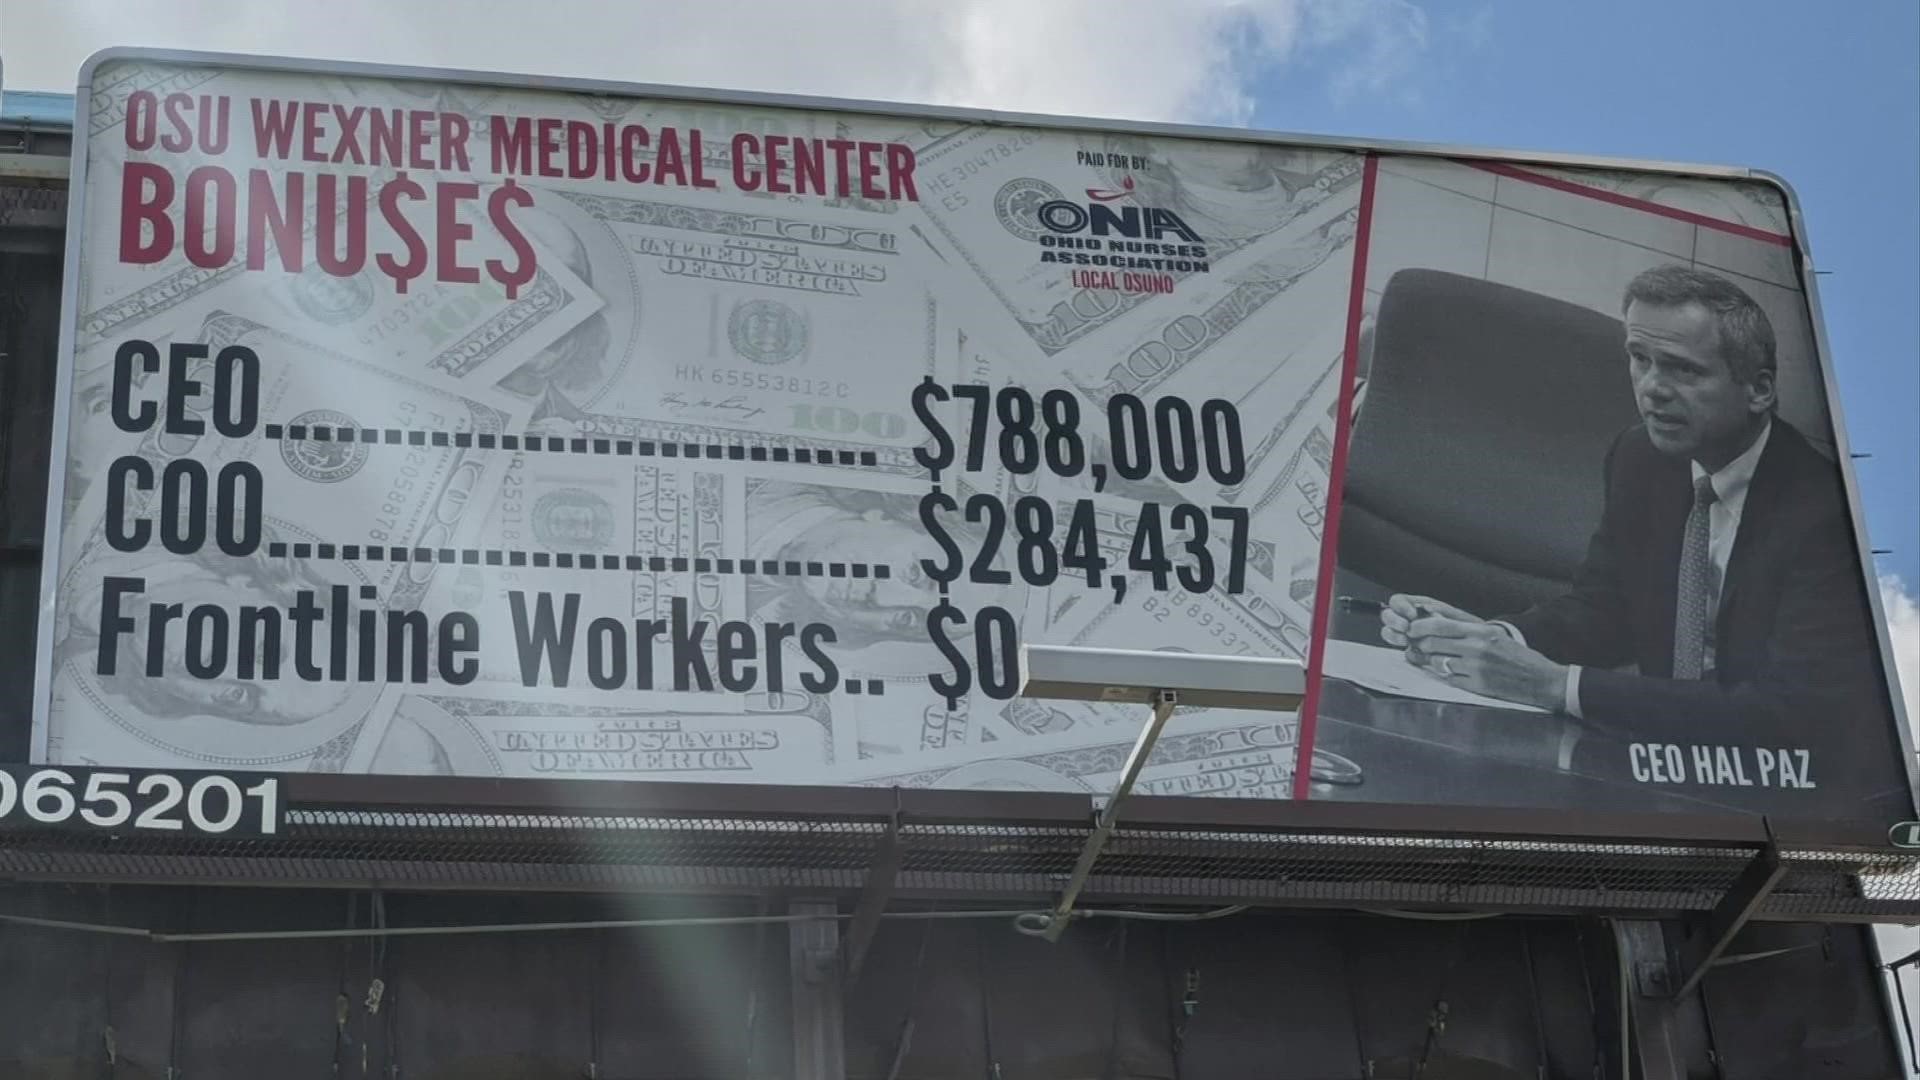 The billboard on State Route 315 claims the Ohio State Wexner Medical Center paid its CEO and COO more than $1 million on bonuses, but none to frontline workers.